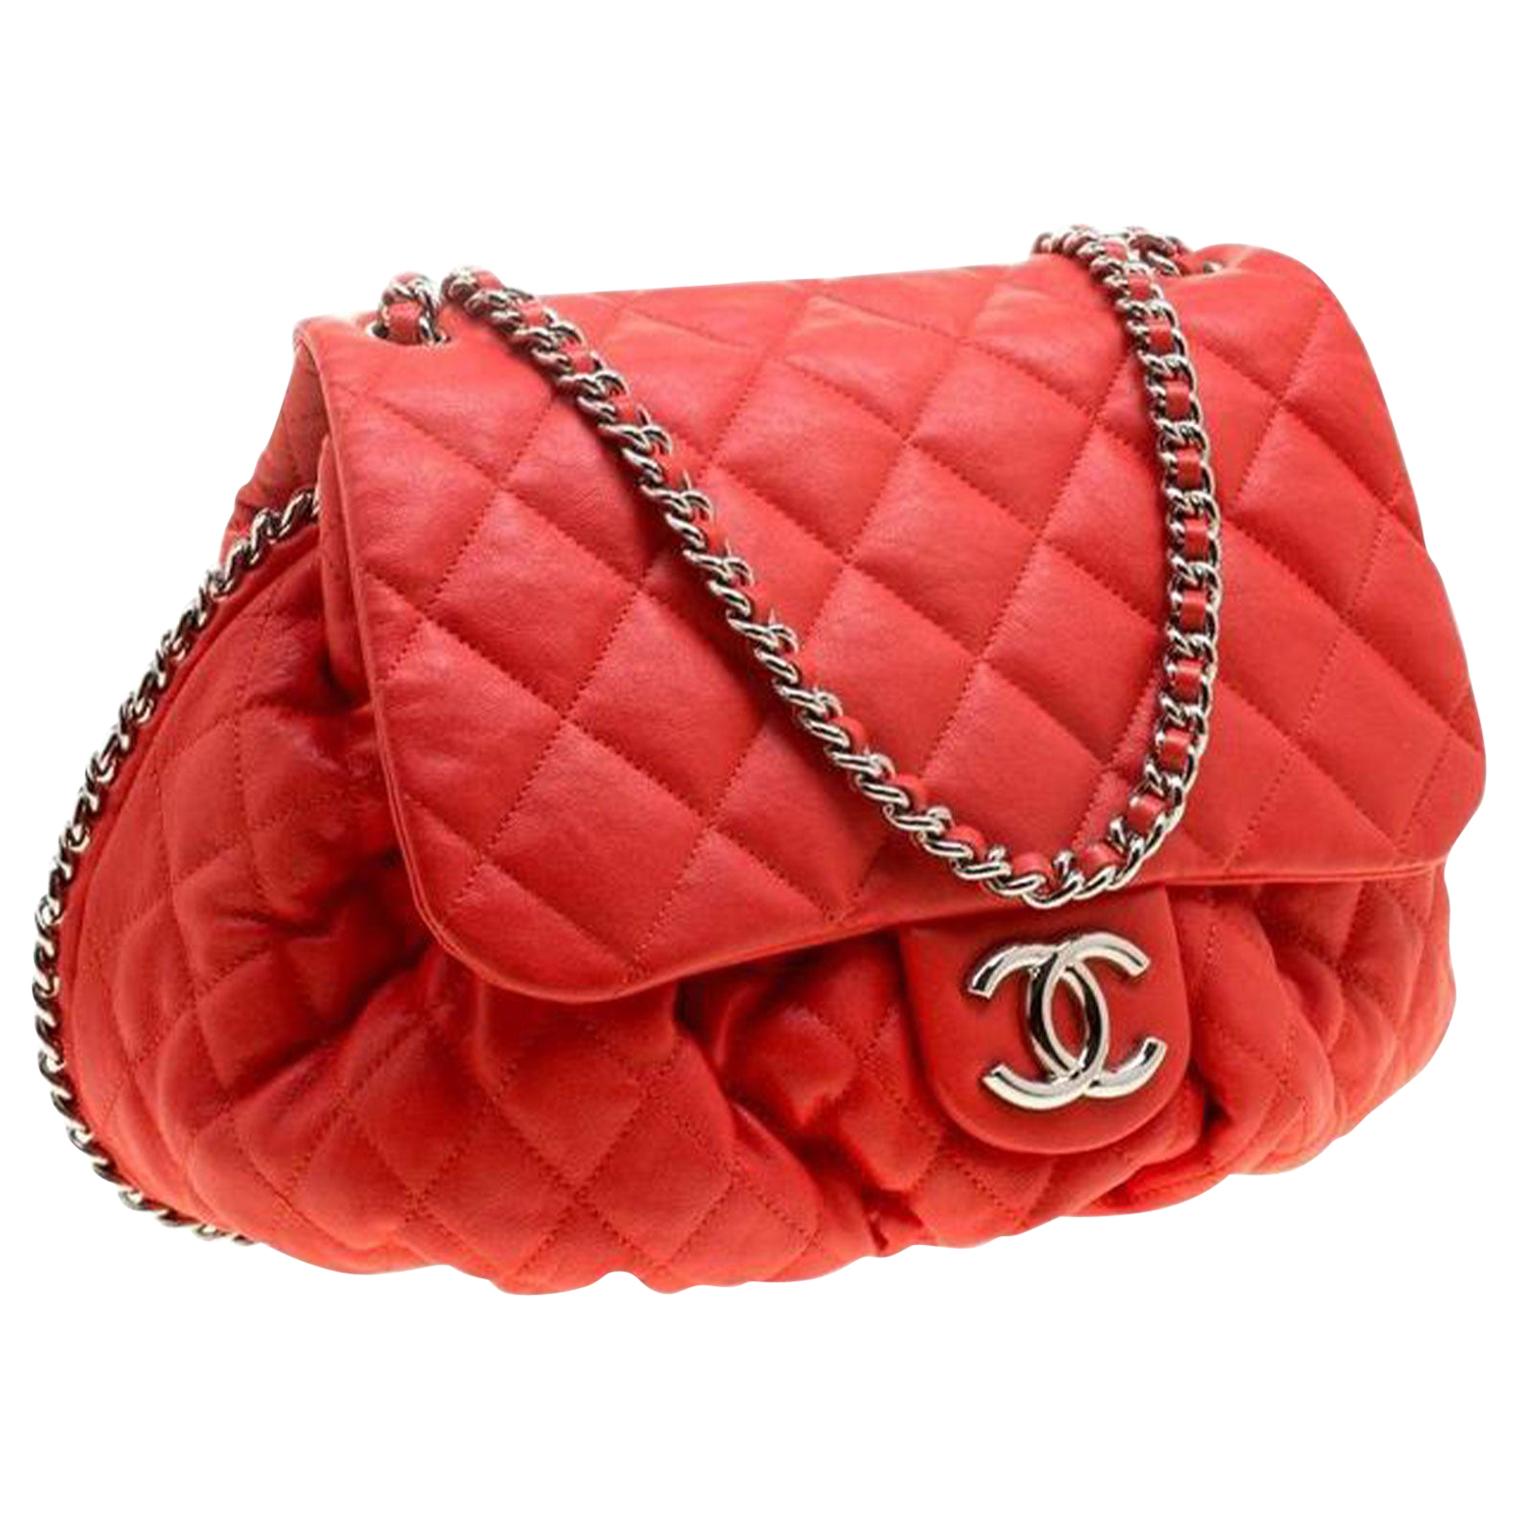 Chanel Large Chain Around Limited Edition Pristine Red Calfskin Leather Flap Bag For Sale 3